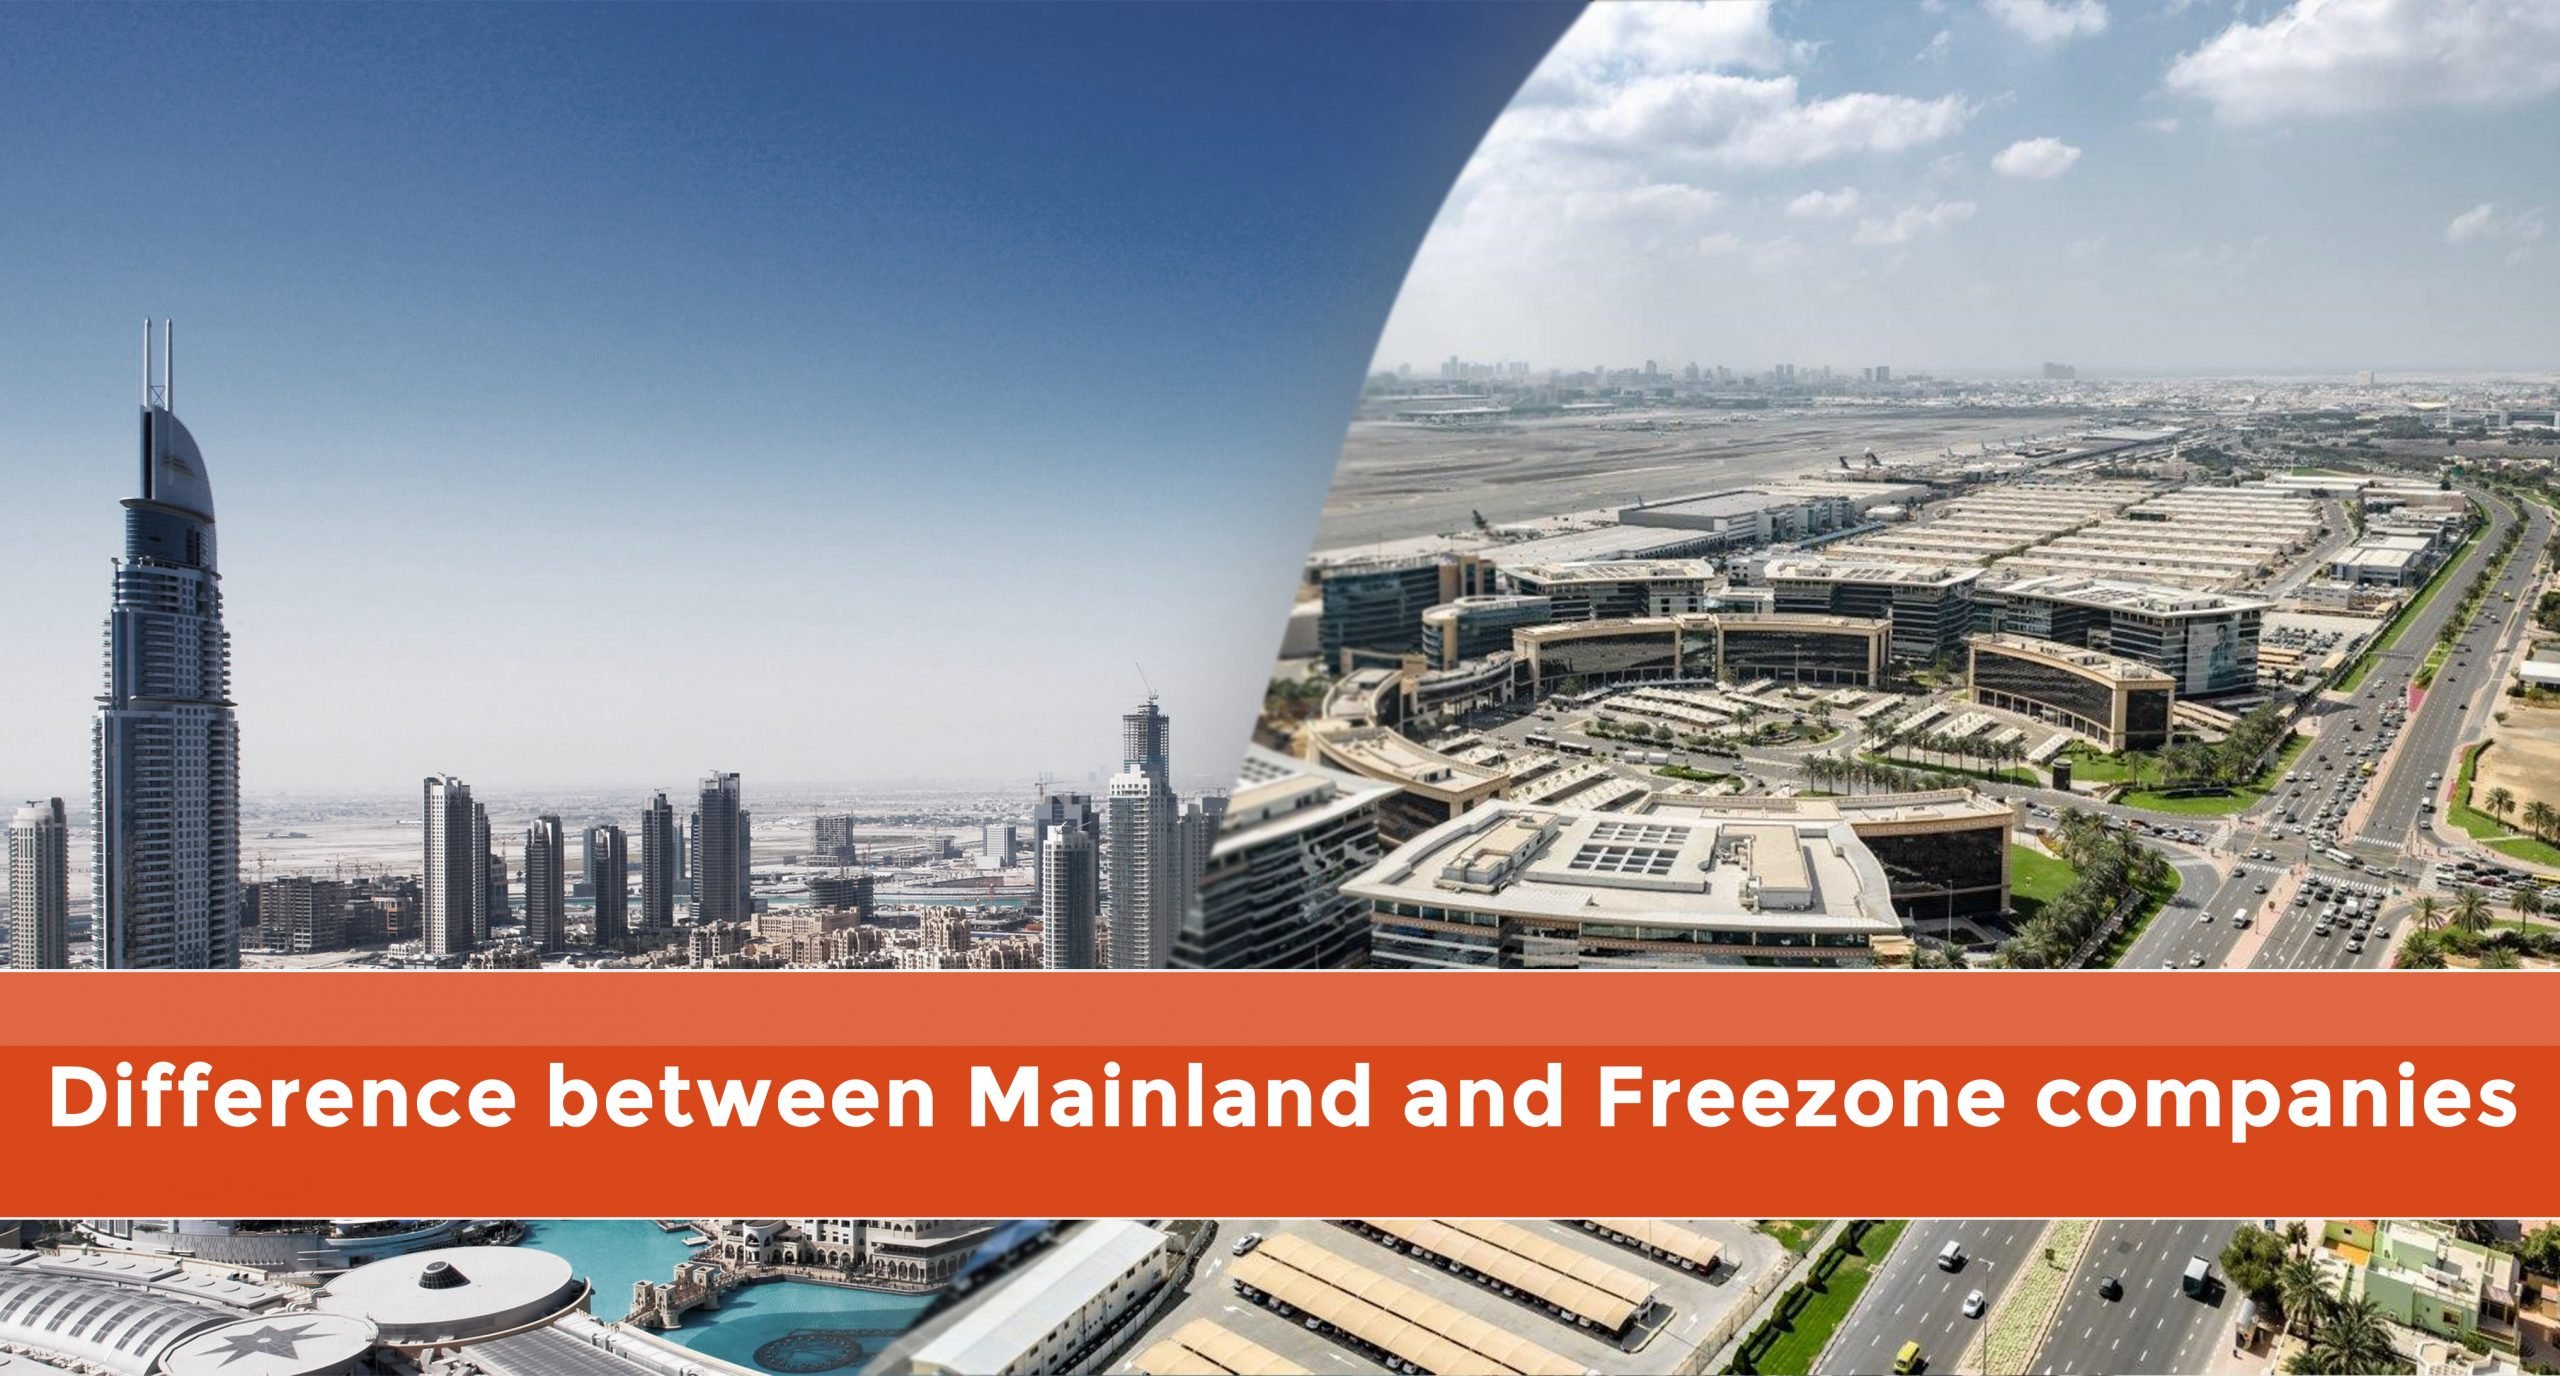 Difference between Mainland and Freezone Companies